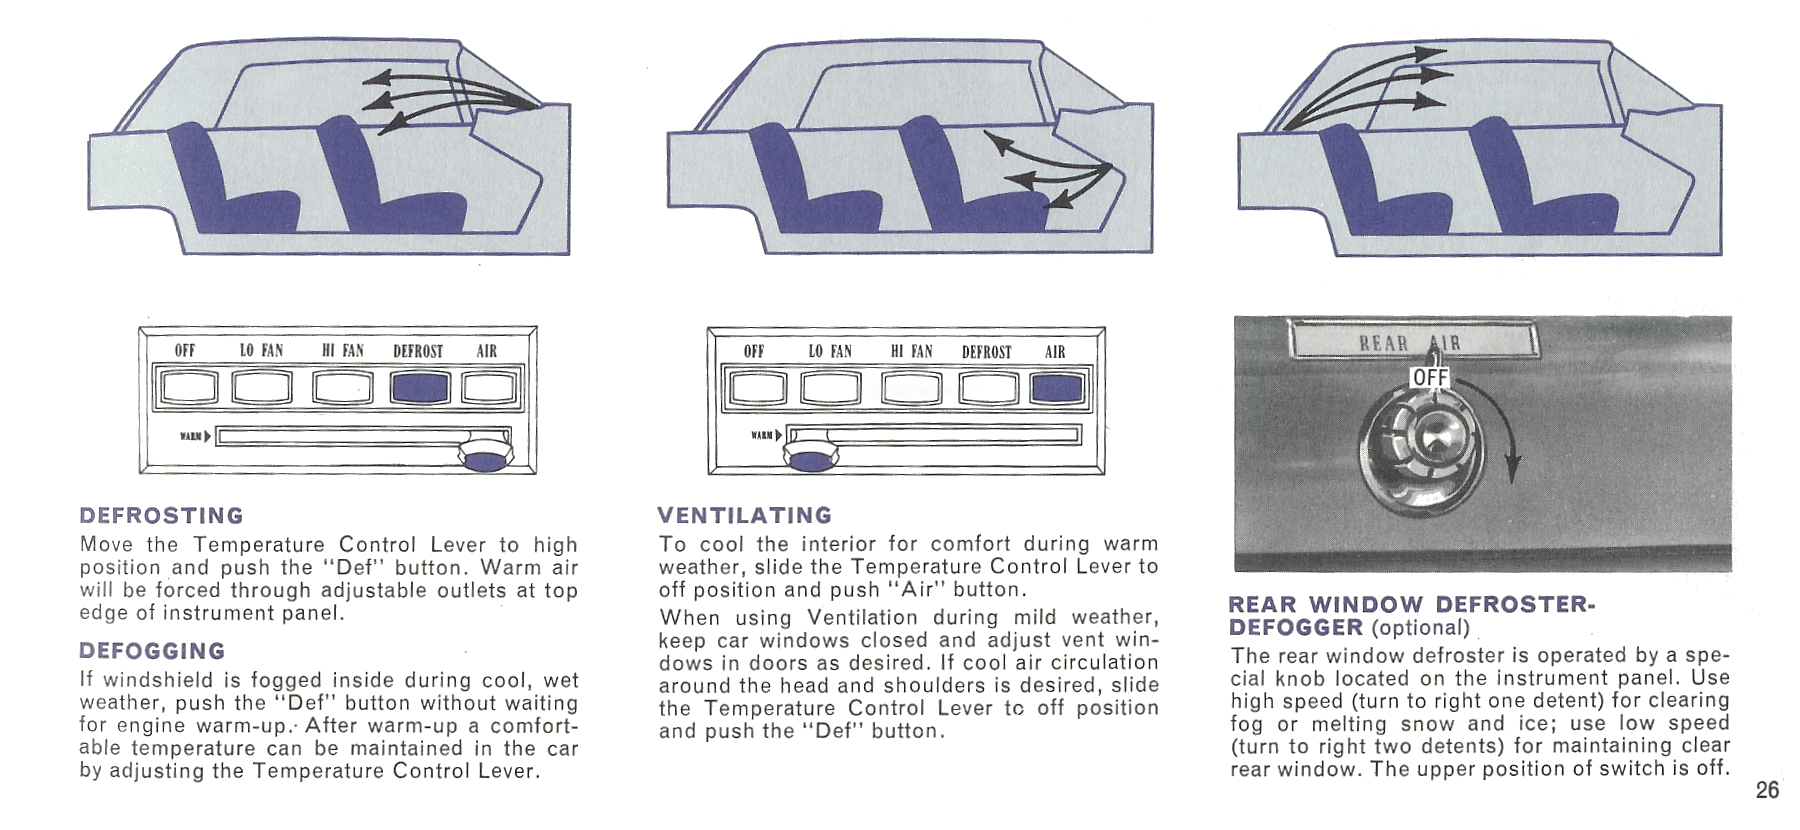 1965 Chrysler Imperial Owners Manual Page 3